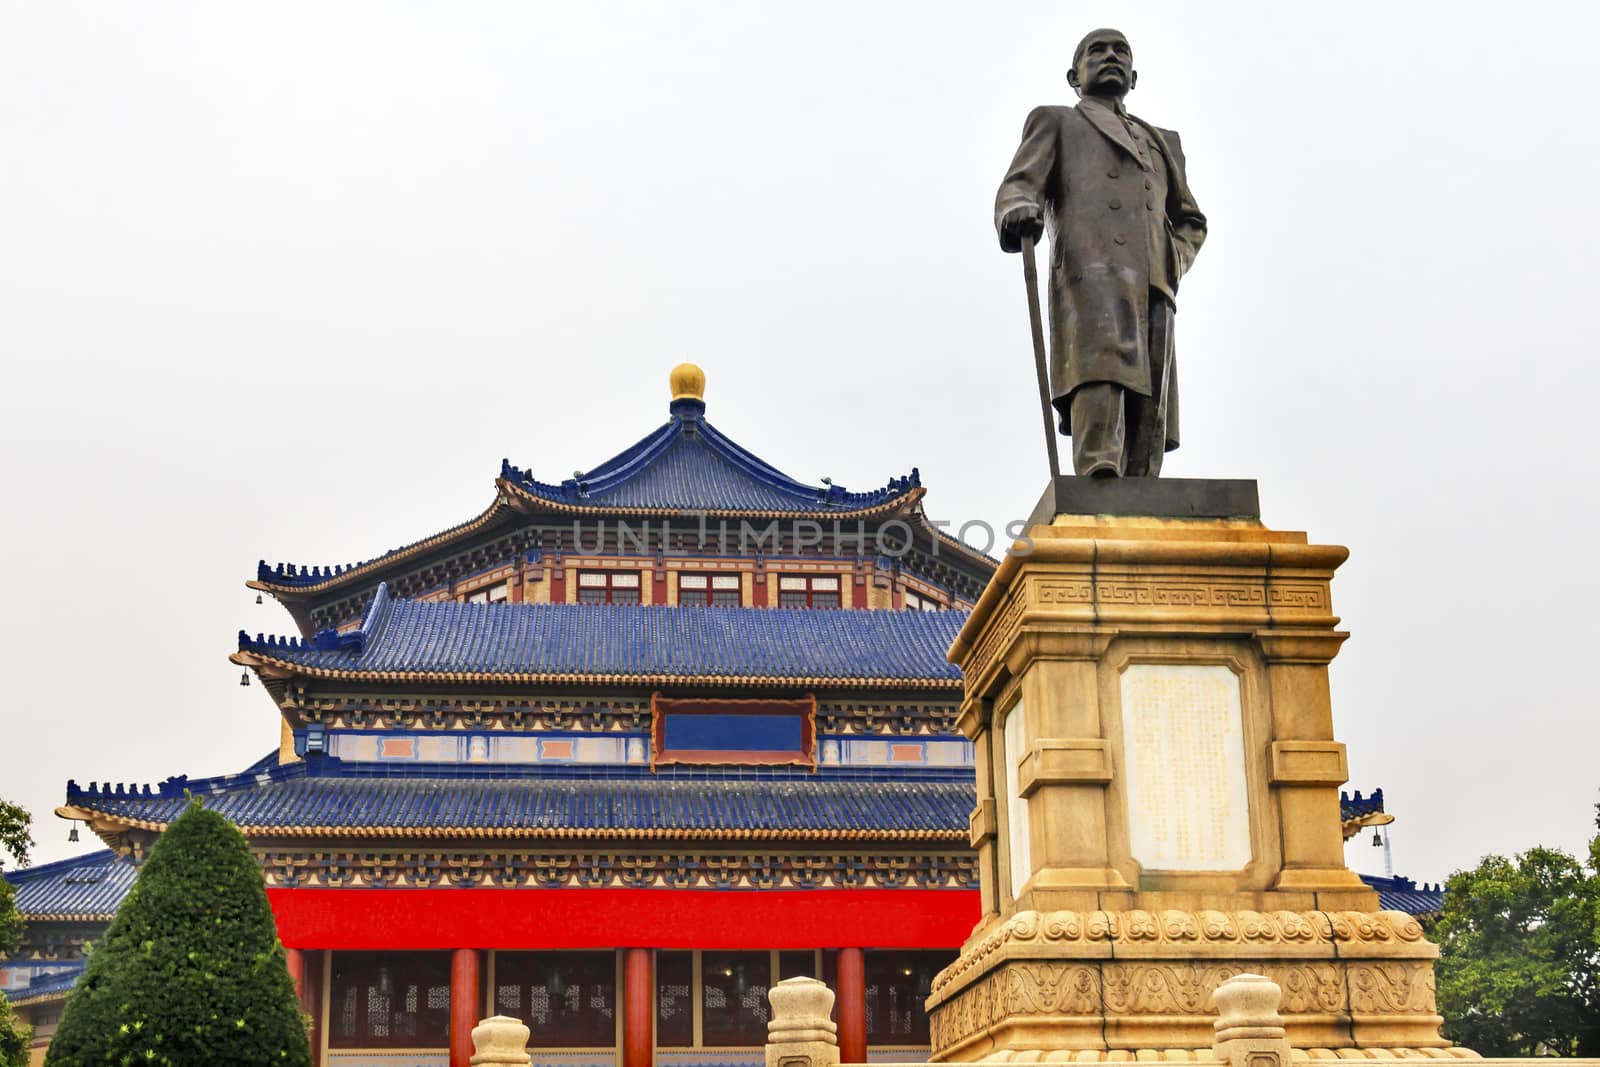 Sun Yat-Sen Memorial Guangzhou City Guangdong Province China.  Sun Yat-Sen's Memorial was constructed between 1929 to 1931 and is a memorial to the person, who inspired the Chinese revolution.  Sun Yat-Sen statue was built in 1956.